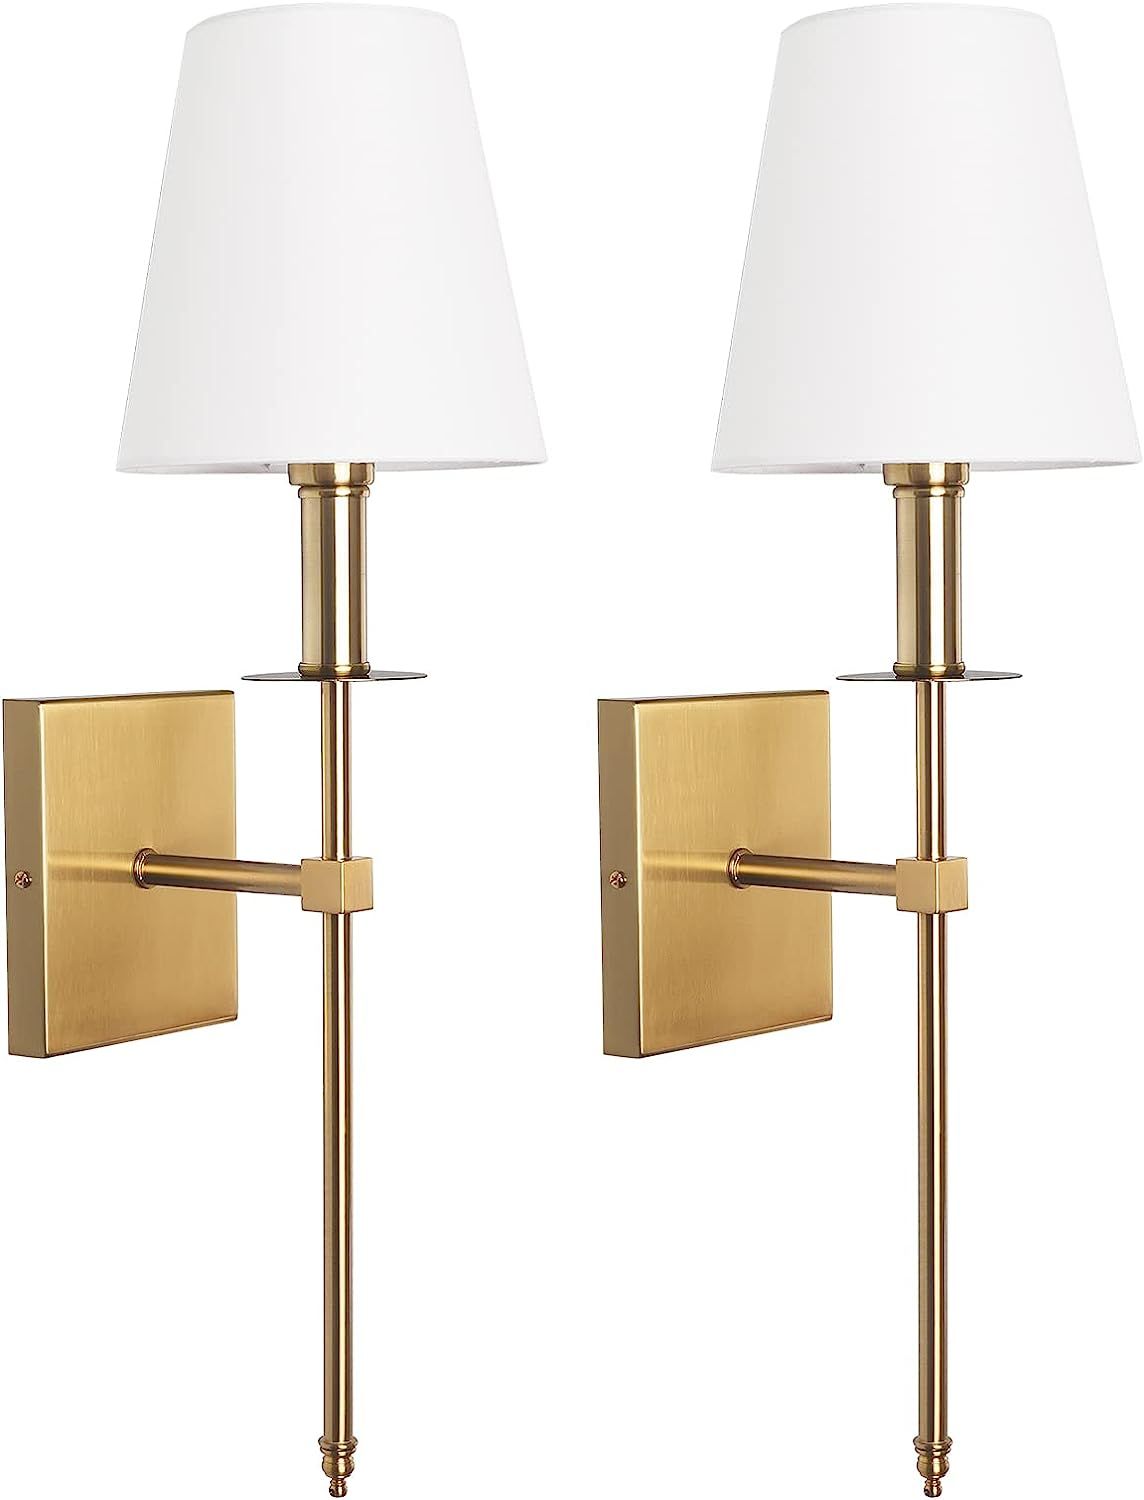 Wall Sconces Set of 2 Gold Wall Lamps Modern Sconces Wall Lighting with White Fabric Shade Bathro... | Amazon (US)